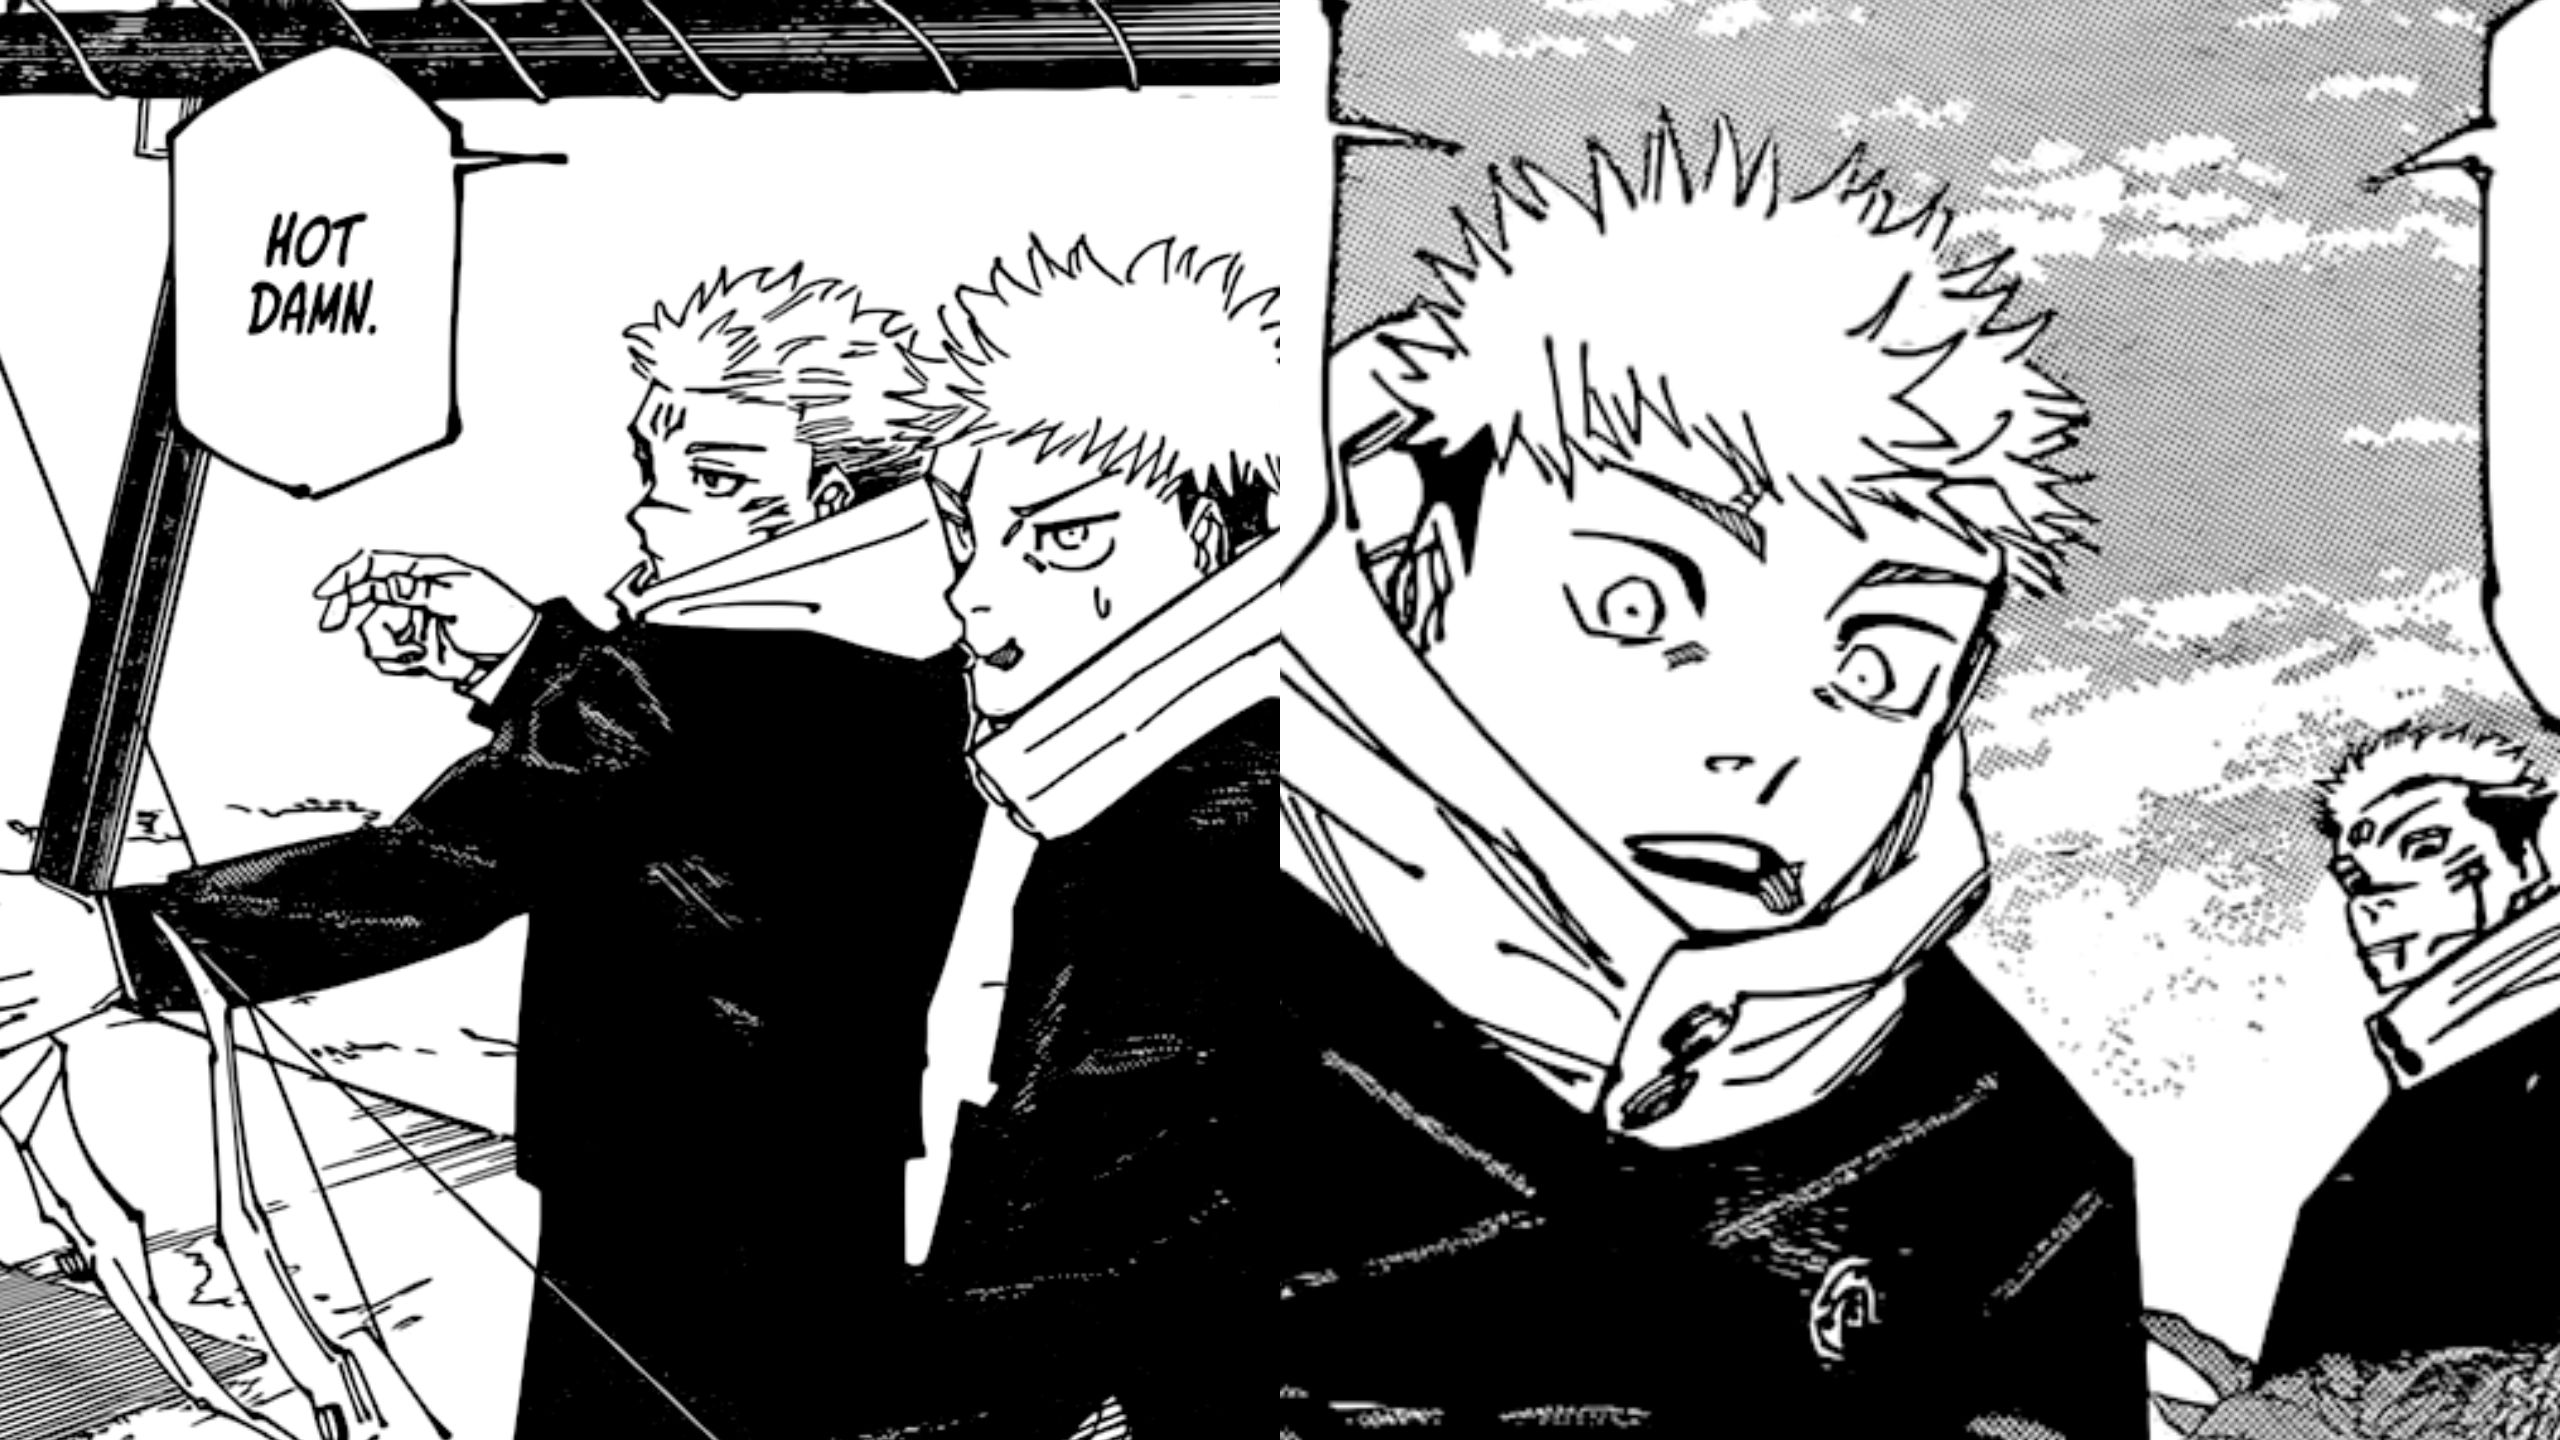 Jujutsu Kaisen: Yuji's Domain Expansion Might Spell Doom for Both Him and Sukuna—Can Maki Alter Their Fate Once More?